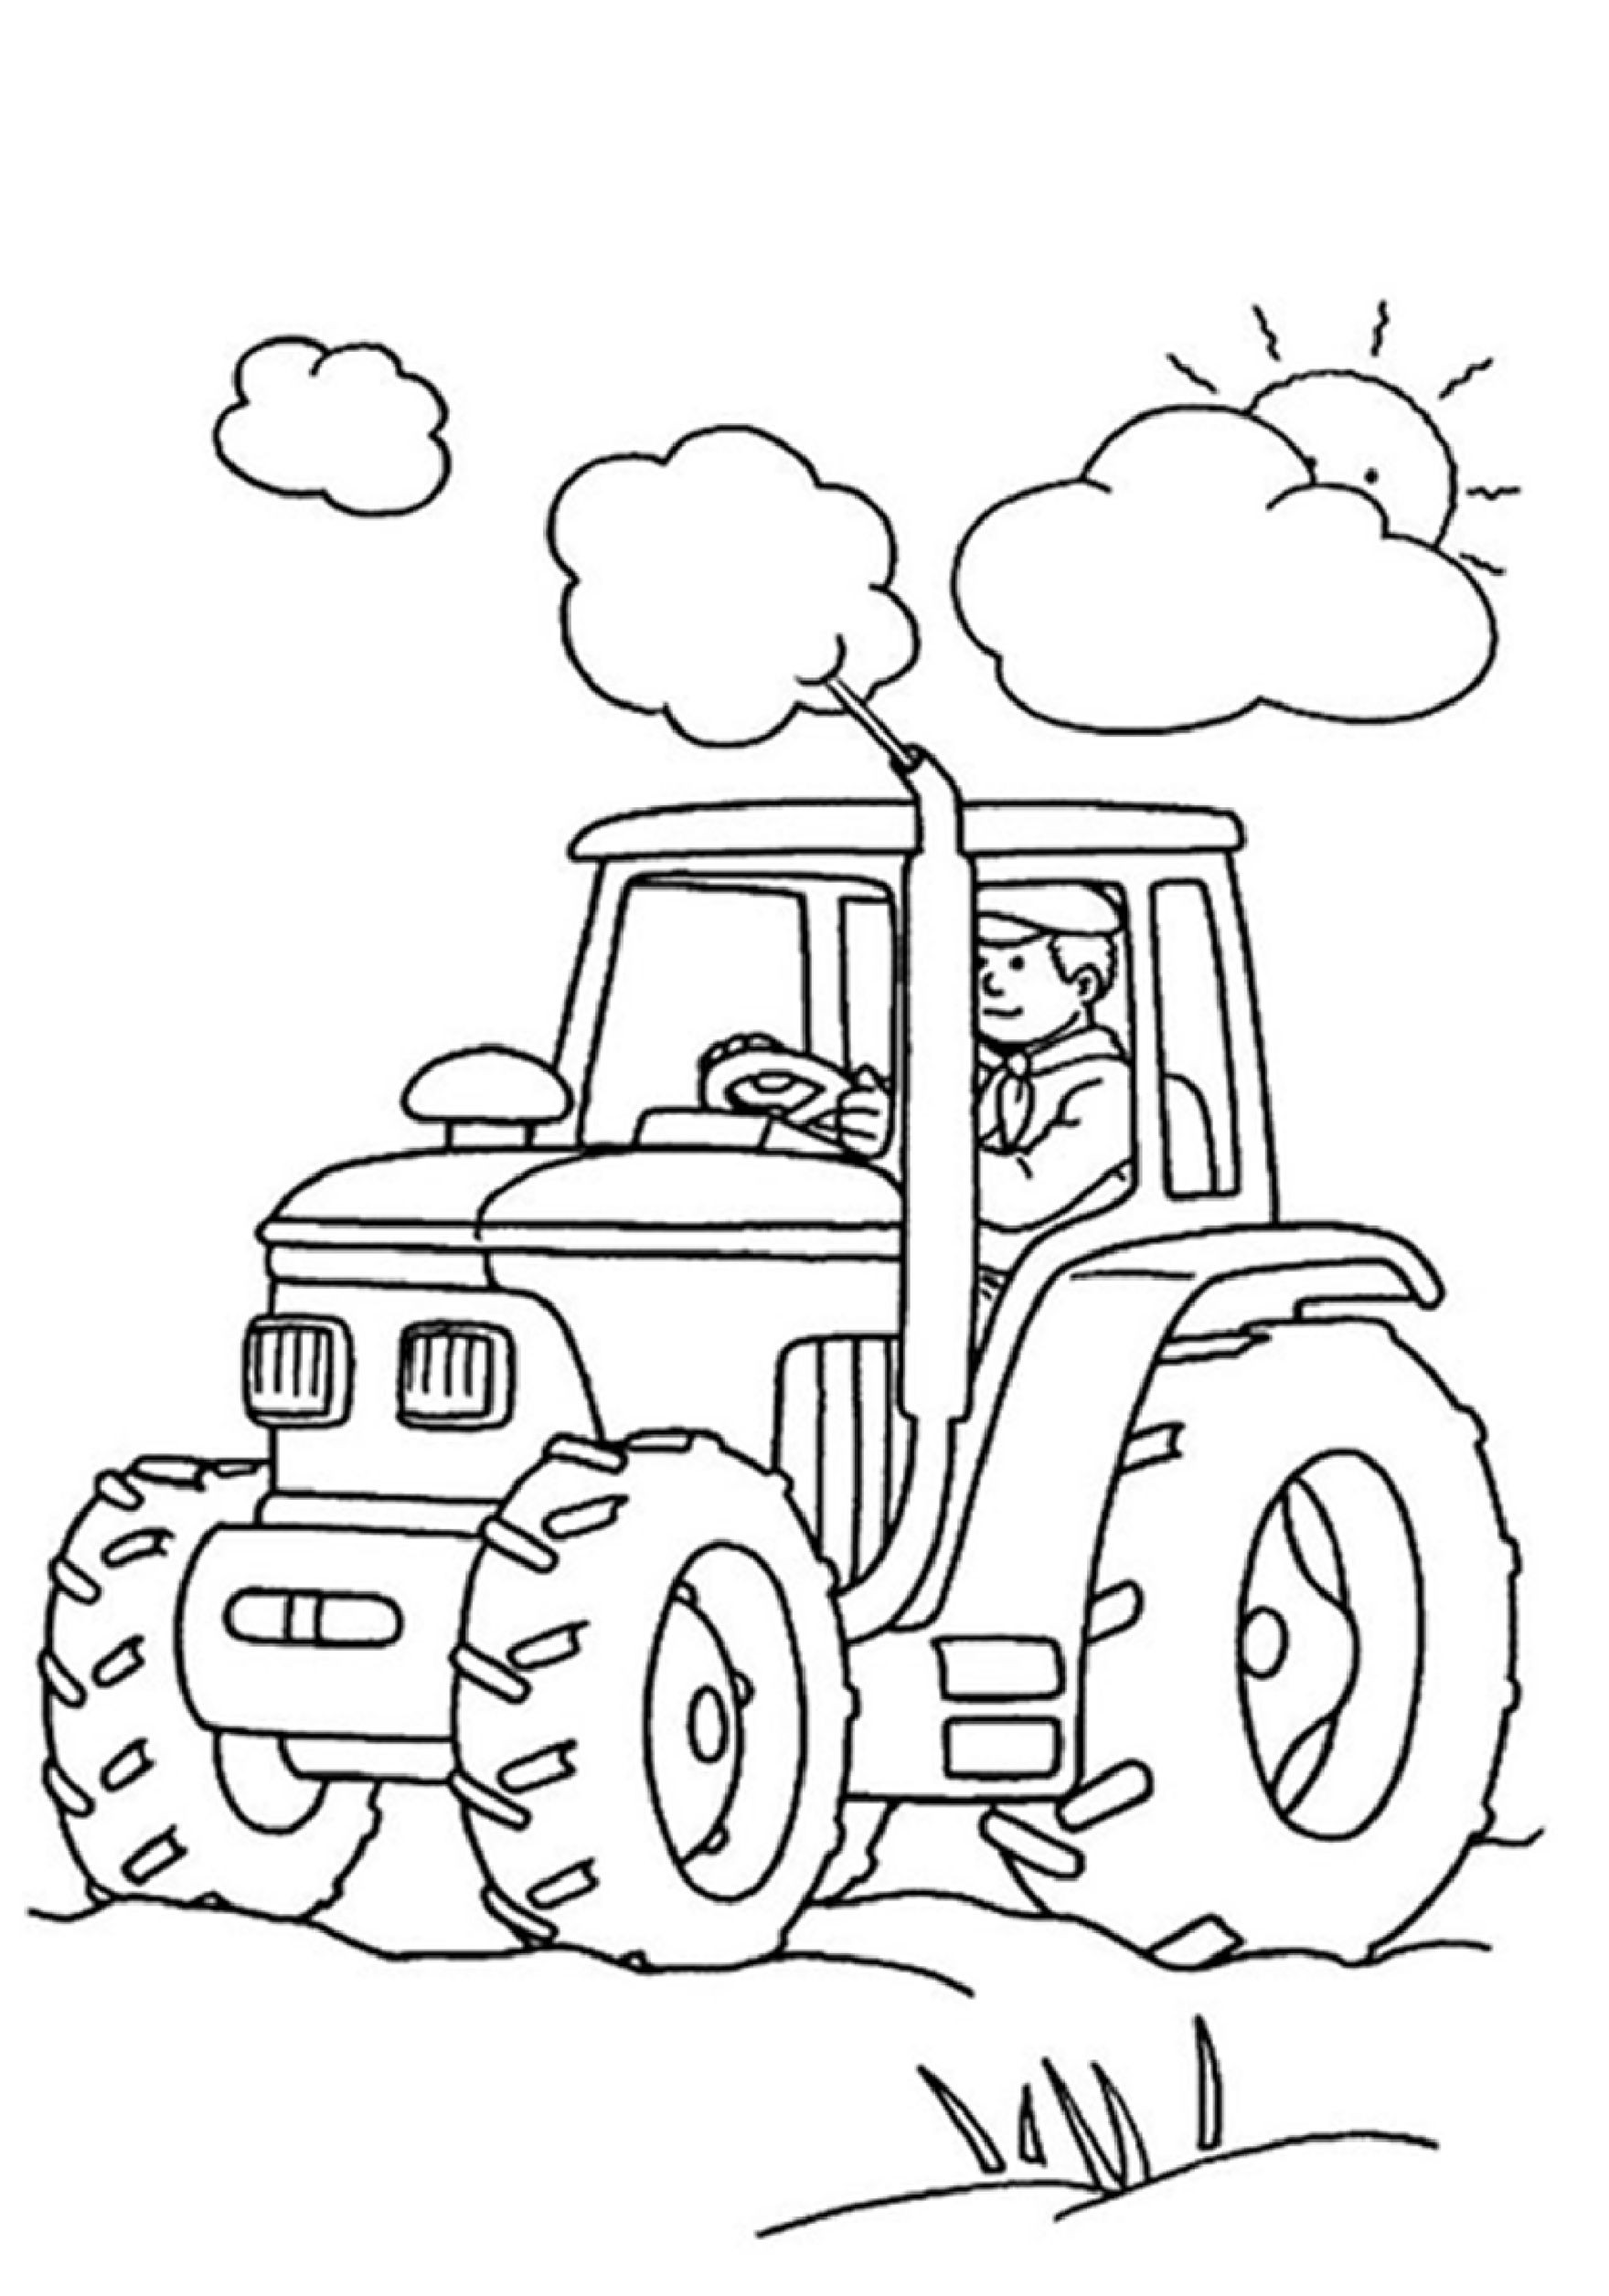 Coloring Pages For Toddlers Pdf
 Knowledge Free Printable Coloring Pages For Kids Resume